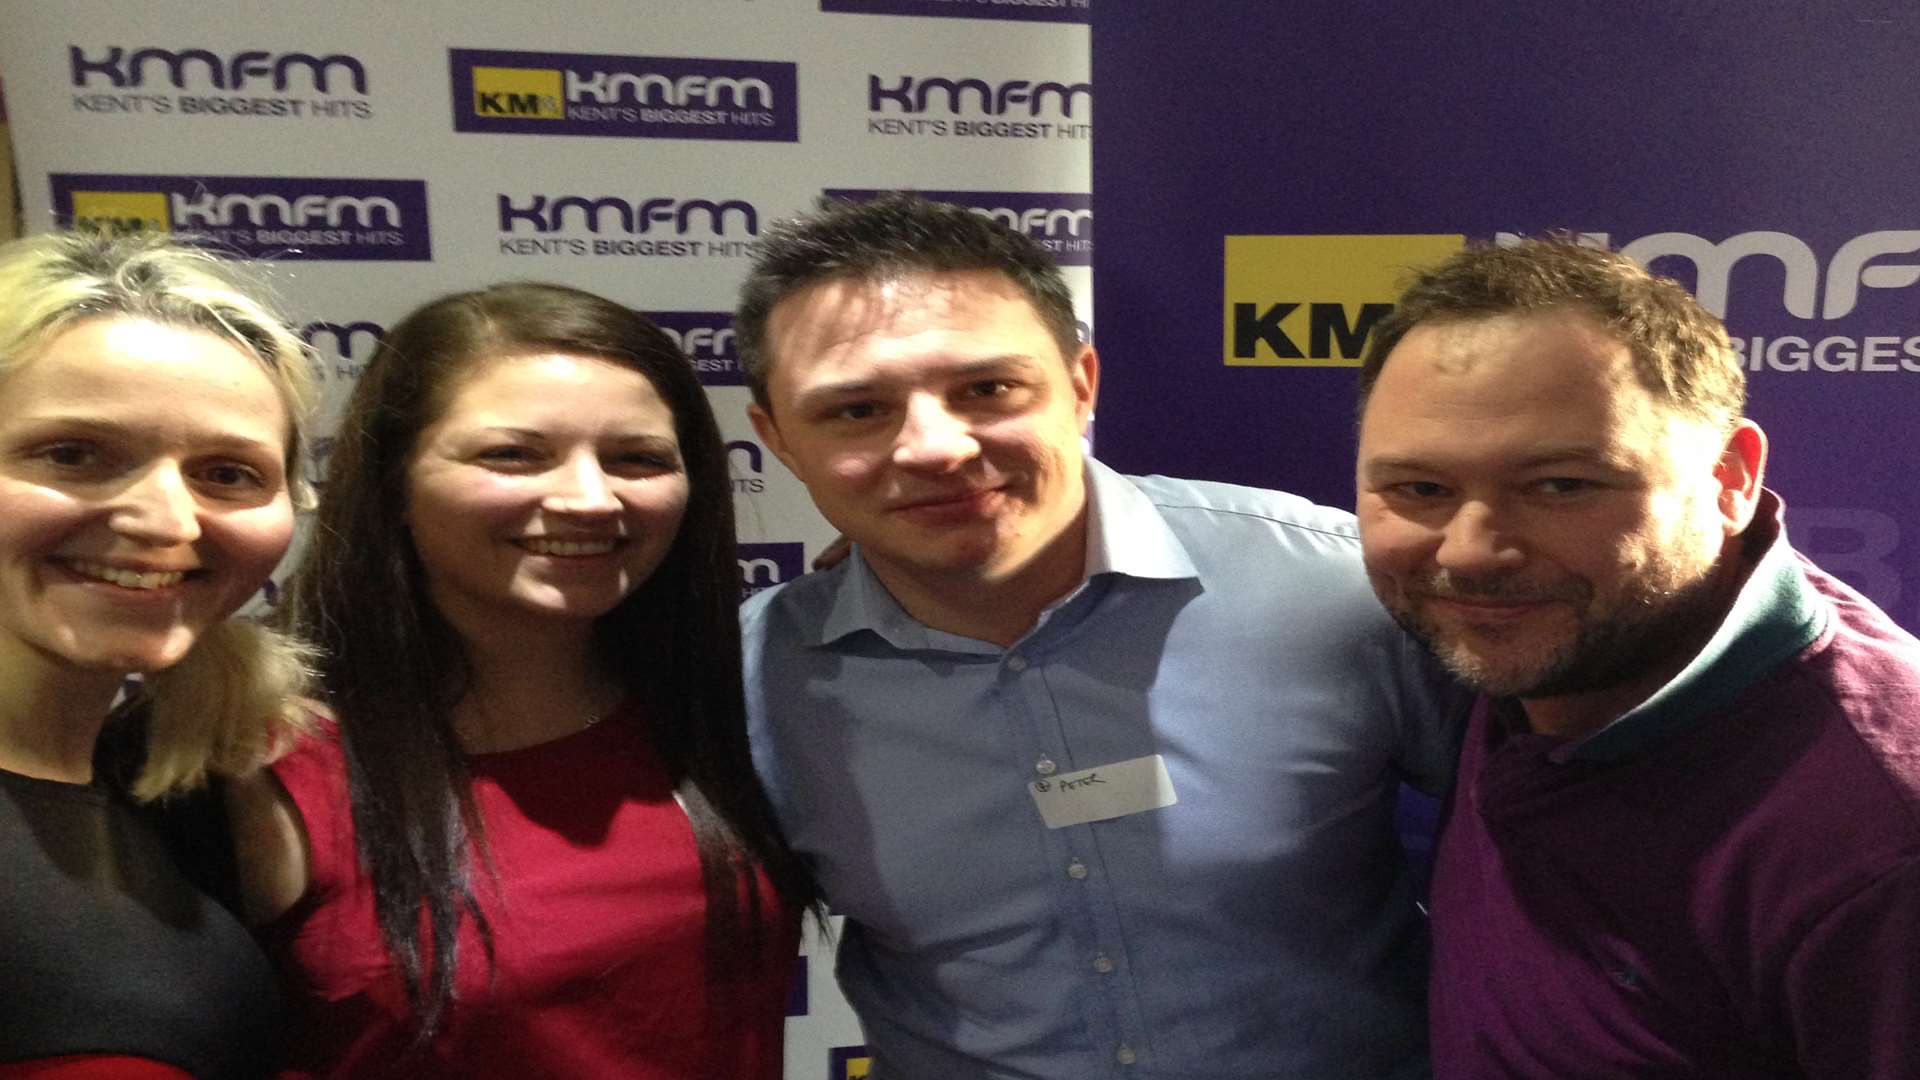 Kayleigh and Peter win kmfm's Love is in the Air competition